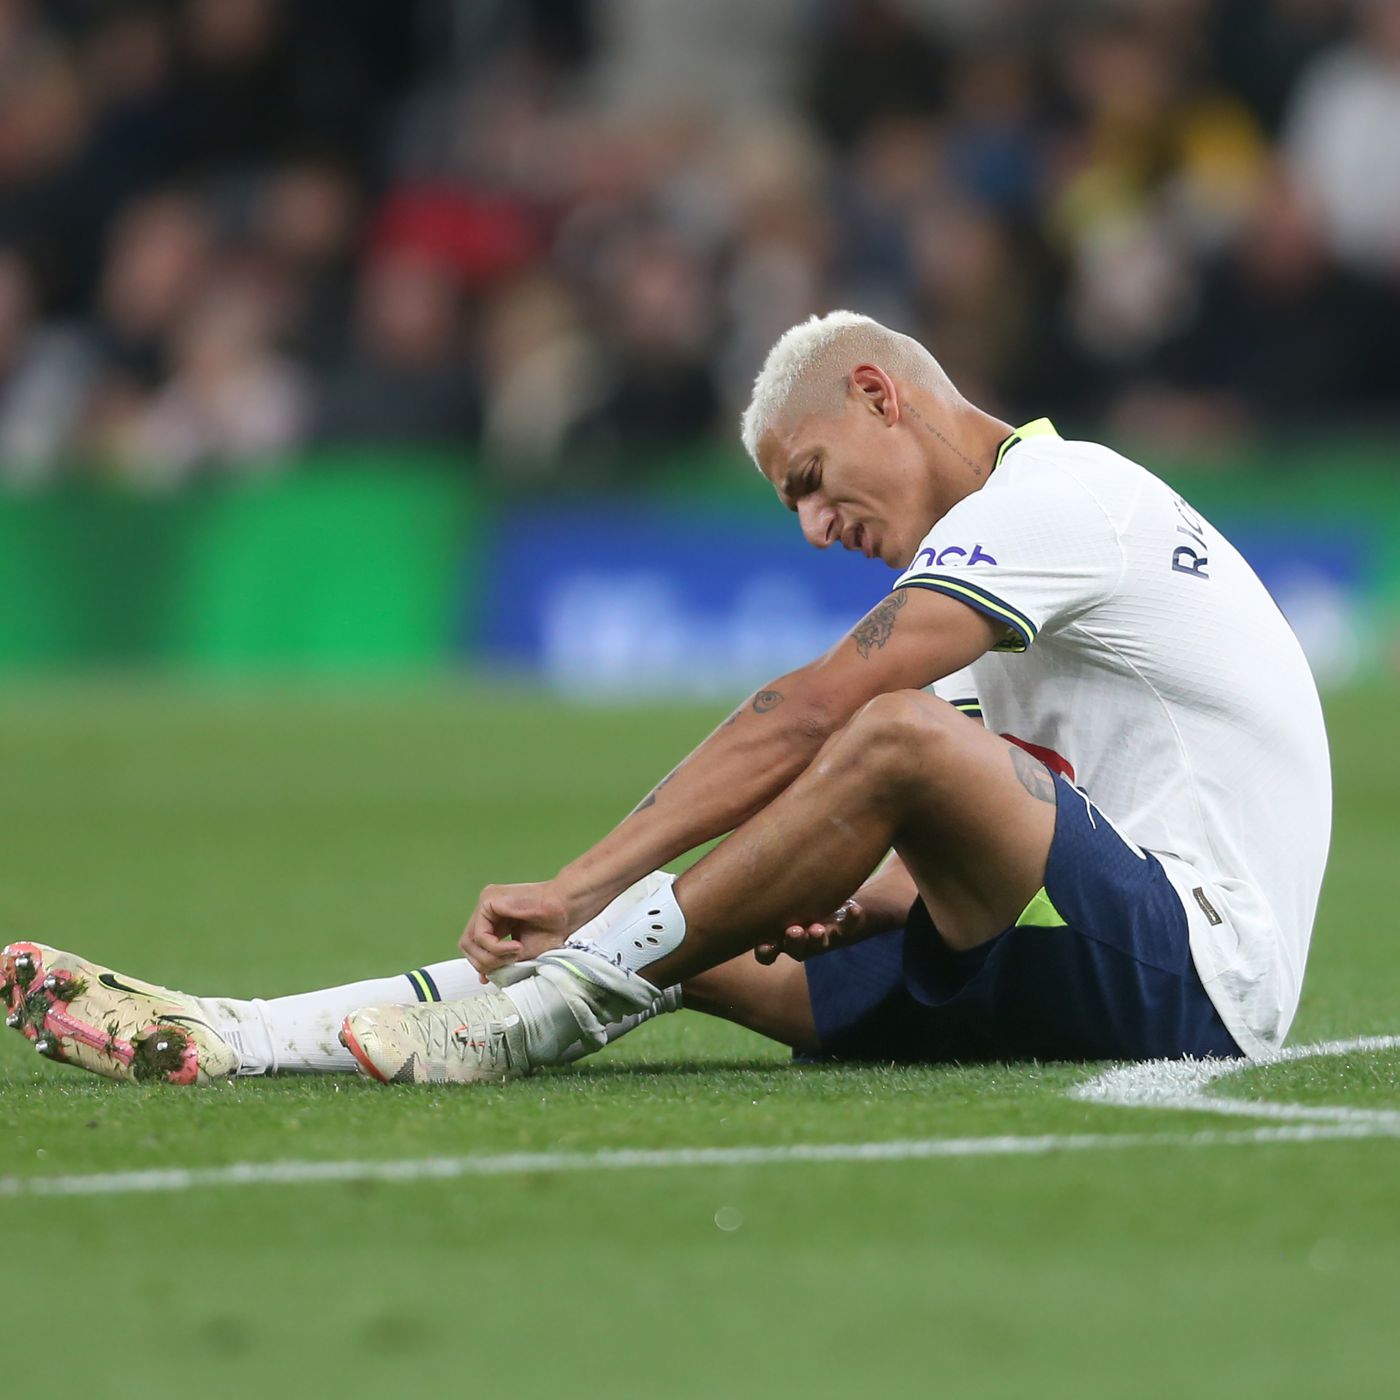 ESPN: Richarlison “inconsolable” in Tottenham changing room after calf injury Free Captain